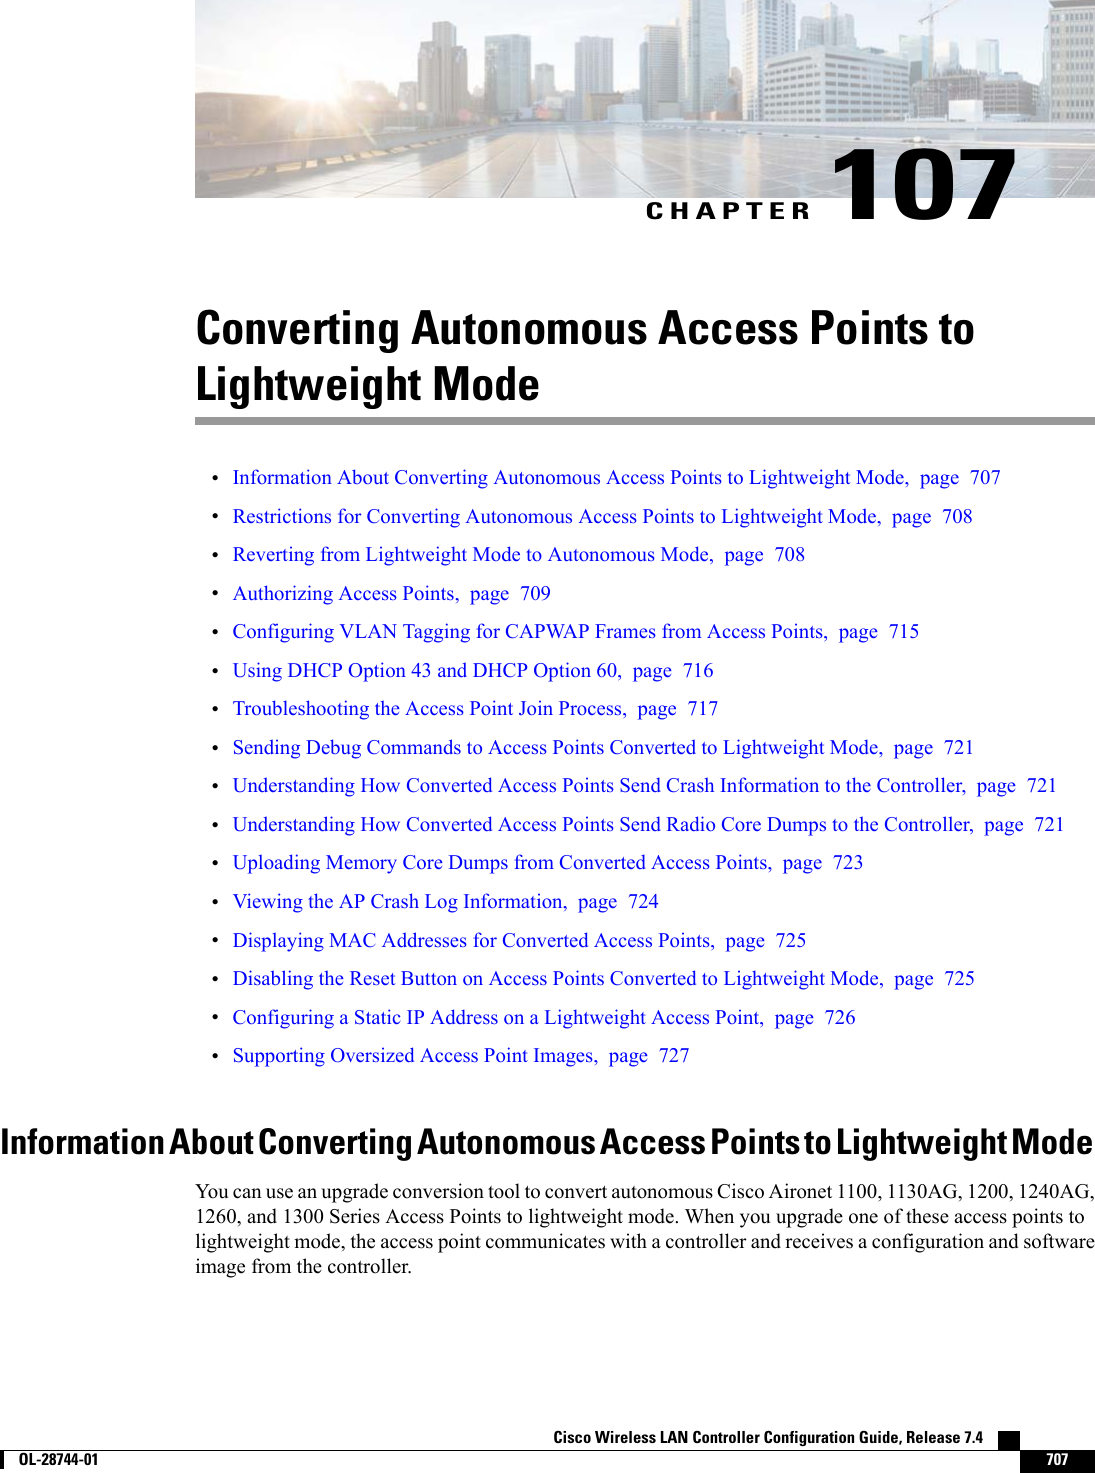 CHAPTER 107Converting Autonomous Access Points toLightweight Mode•Information About Converting Autonomous Access Points to Lightweight Mode, page 707•Restrictions for Converting Autonomous Access Points to Lightweight Mode, page 708•Reverting from Lightweight Mode to Autonomous Mode, page 708•Authorizing Access Points, page 709•Configuring VLAN Tagging for CAPWAP Frames from Access Points, page 715•Using DHCP Option 43 and DHCP Option 60, page 716•Troubleshooting the Access Point Join Process, page 717•Sending Debug Commands to Access Points Converted to Lightweight Mode, page 721•Understanding How Converted Access Points Send Crash Information to the Controller, page 721•Understanding How Converted Access Points Send Radio Core Dumps to the Controller, page 721•Uploading Memory Core Dumps from Converted Access Points, page 723•Viewing the AP Crash Log Information, page 724•Displaying MAC Addresses for Converted Access Points, page 725•Disabling the Reset Button on Access Points Converted to Lightweight Mode, page 725•Configuring a Static IP Address on a Lightweight Access Point, page 726•Supporting Oversized Access Point Images, page 727Information About Converting Autonomous Access Points to Lightweight ModeYou can use an upgrade conversion tool to convert autonomous Cisco Aironet 1100, 1130AG, 1200, 1240AG,1260, and 1300 Series Access Points to lightweight mode. When you upgrade one of these access points tolightweight mode, the access point communicates with a controller and receives a configuration and softwareimage from the controller.Cisco Wireless LAN Controller Configuration Guide, Release 7.4        OL-28744-01 707